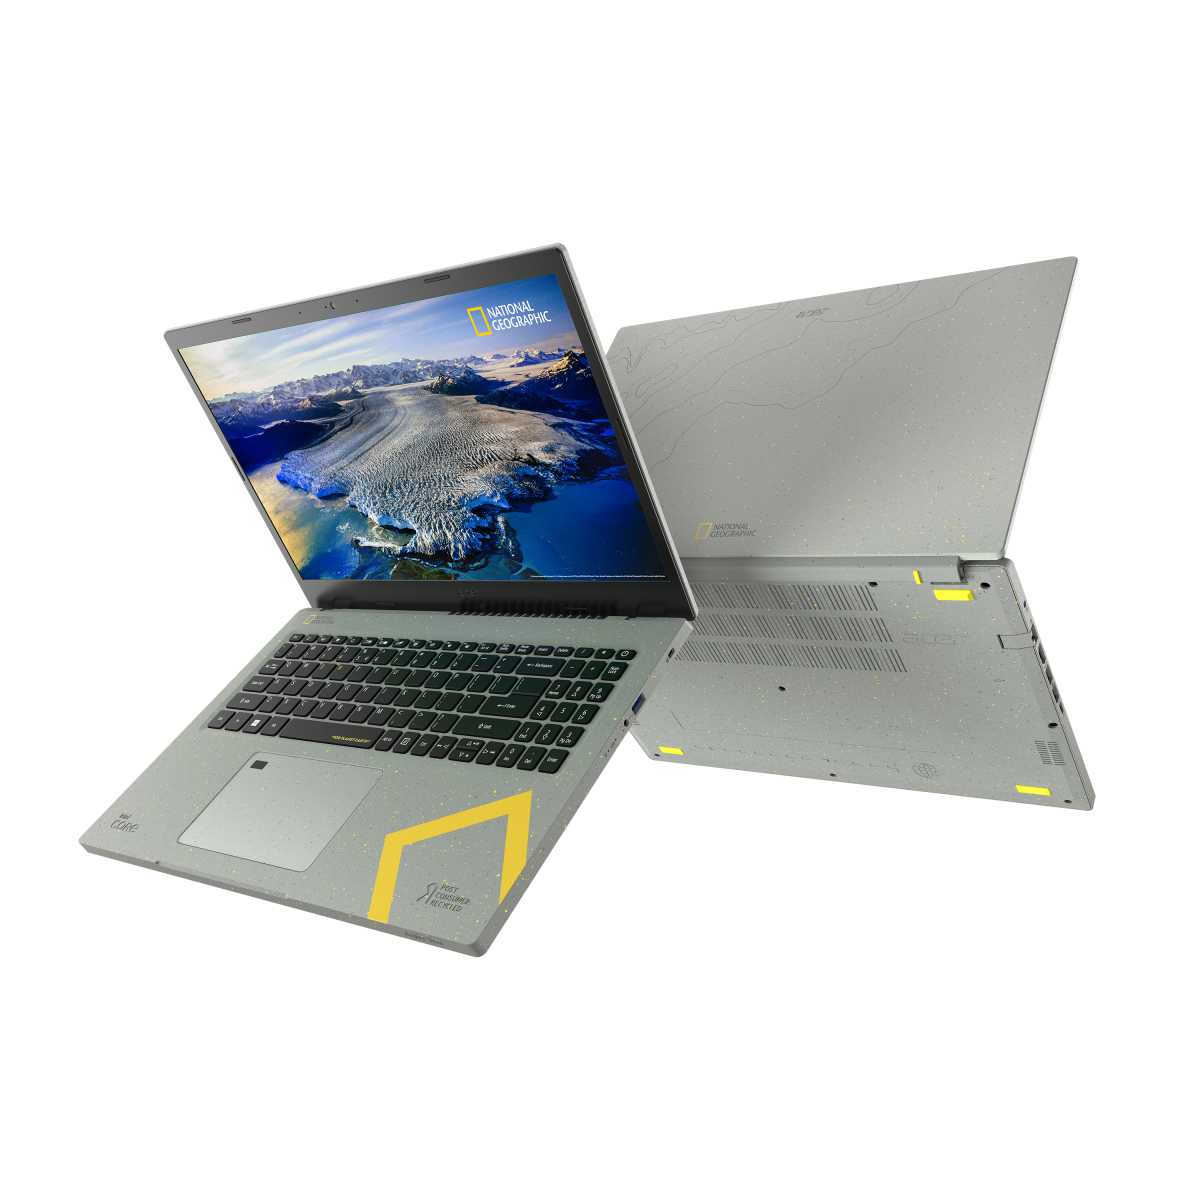 Acer Aspire Vero National Geographic Edition